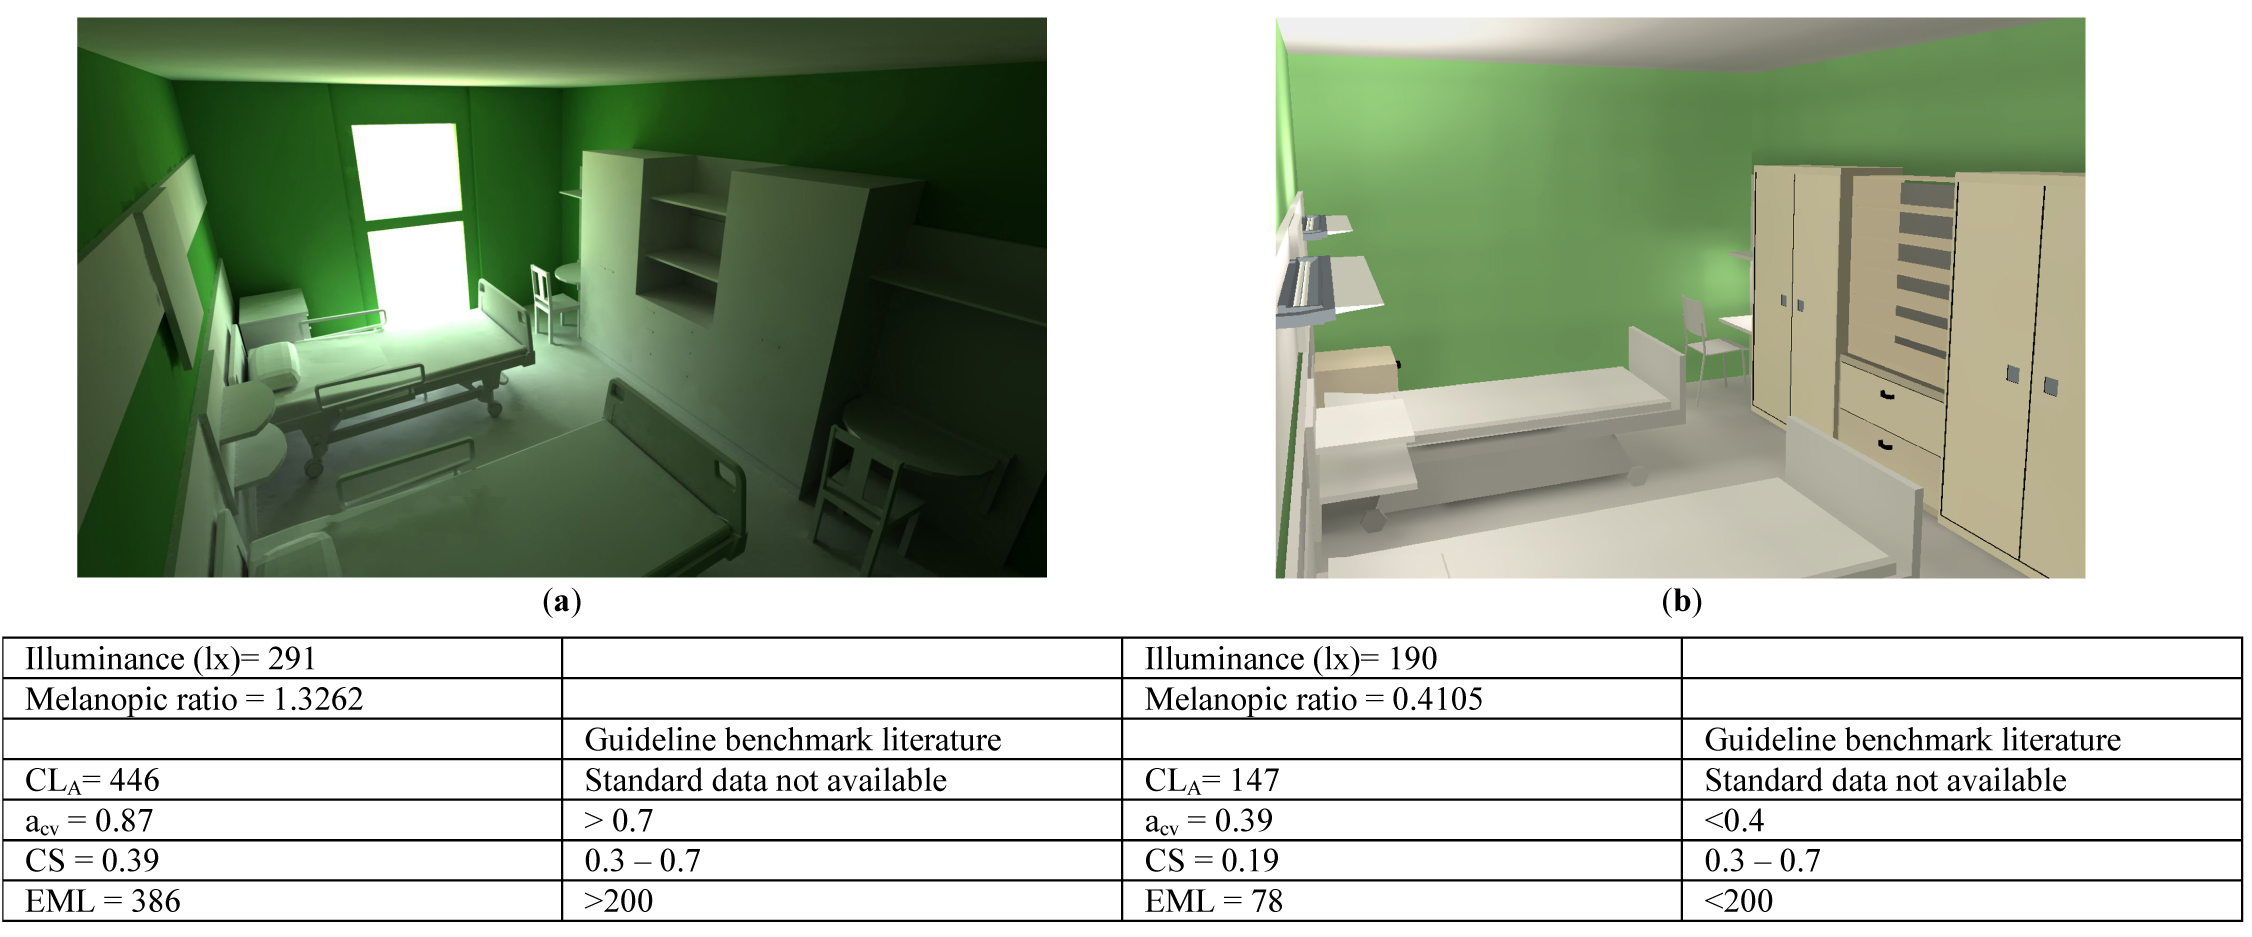 Patient room in project proposals: (a) overcast sky conditions (b) artificial light.